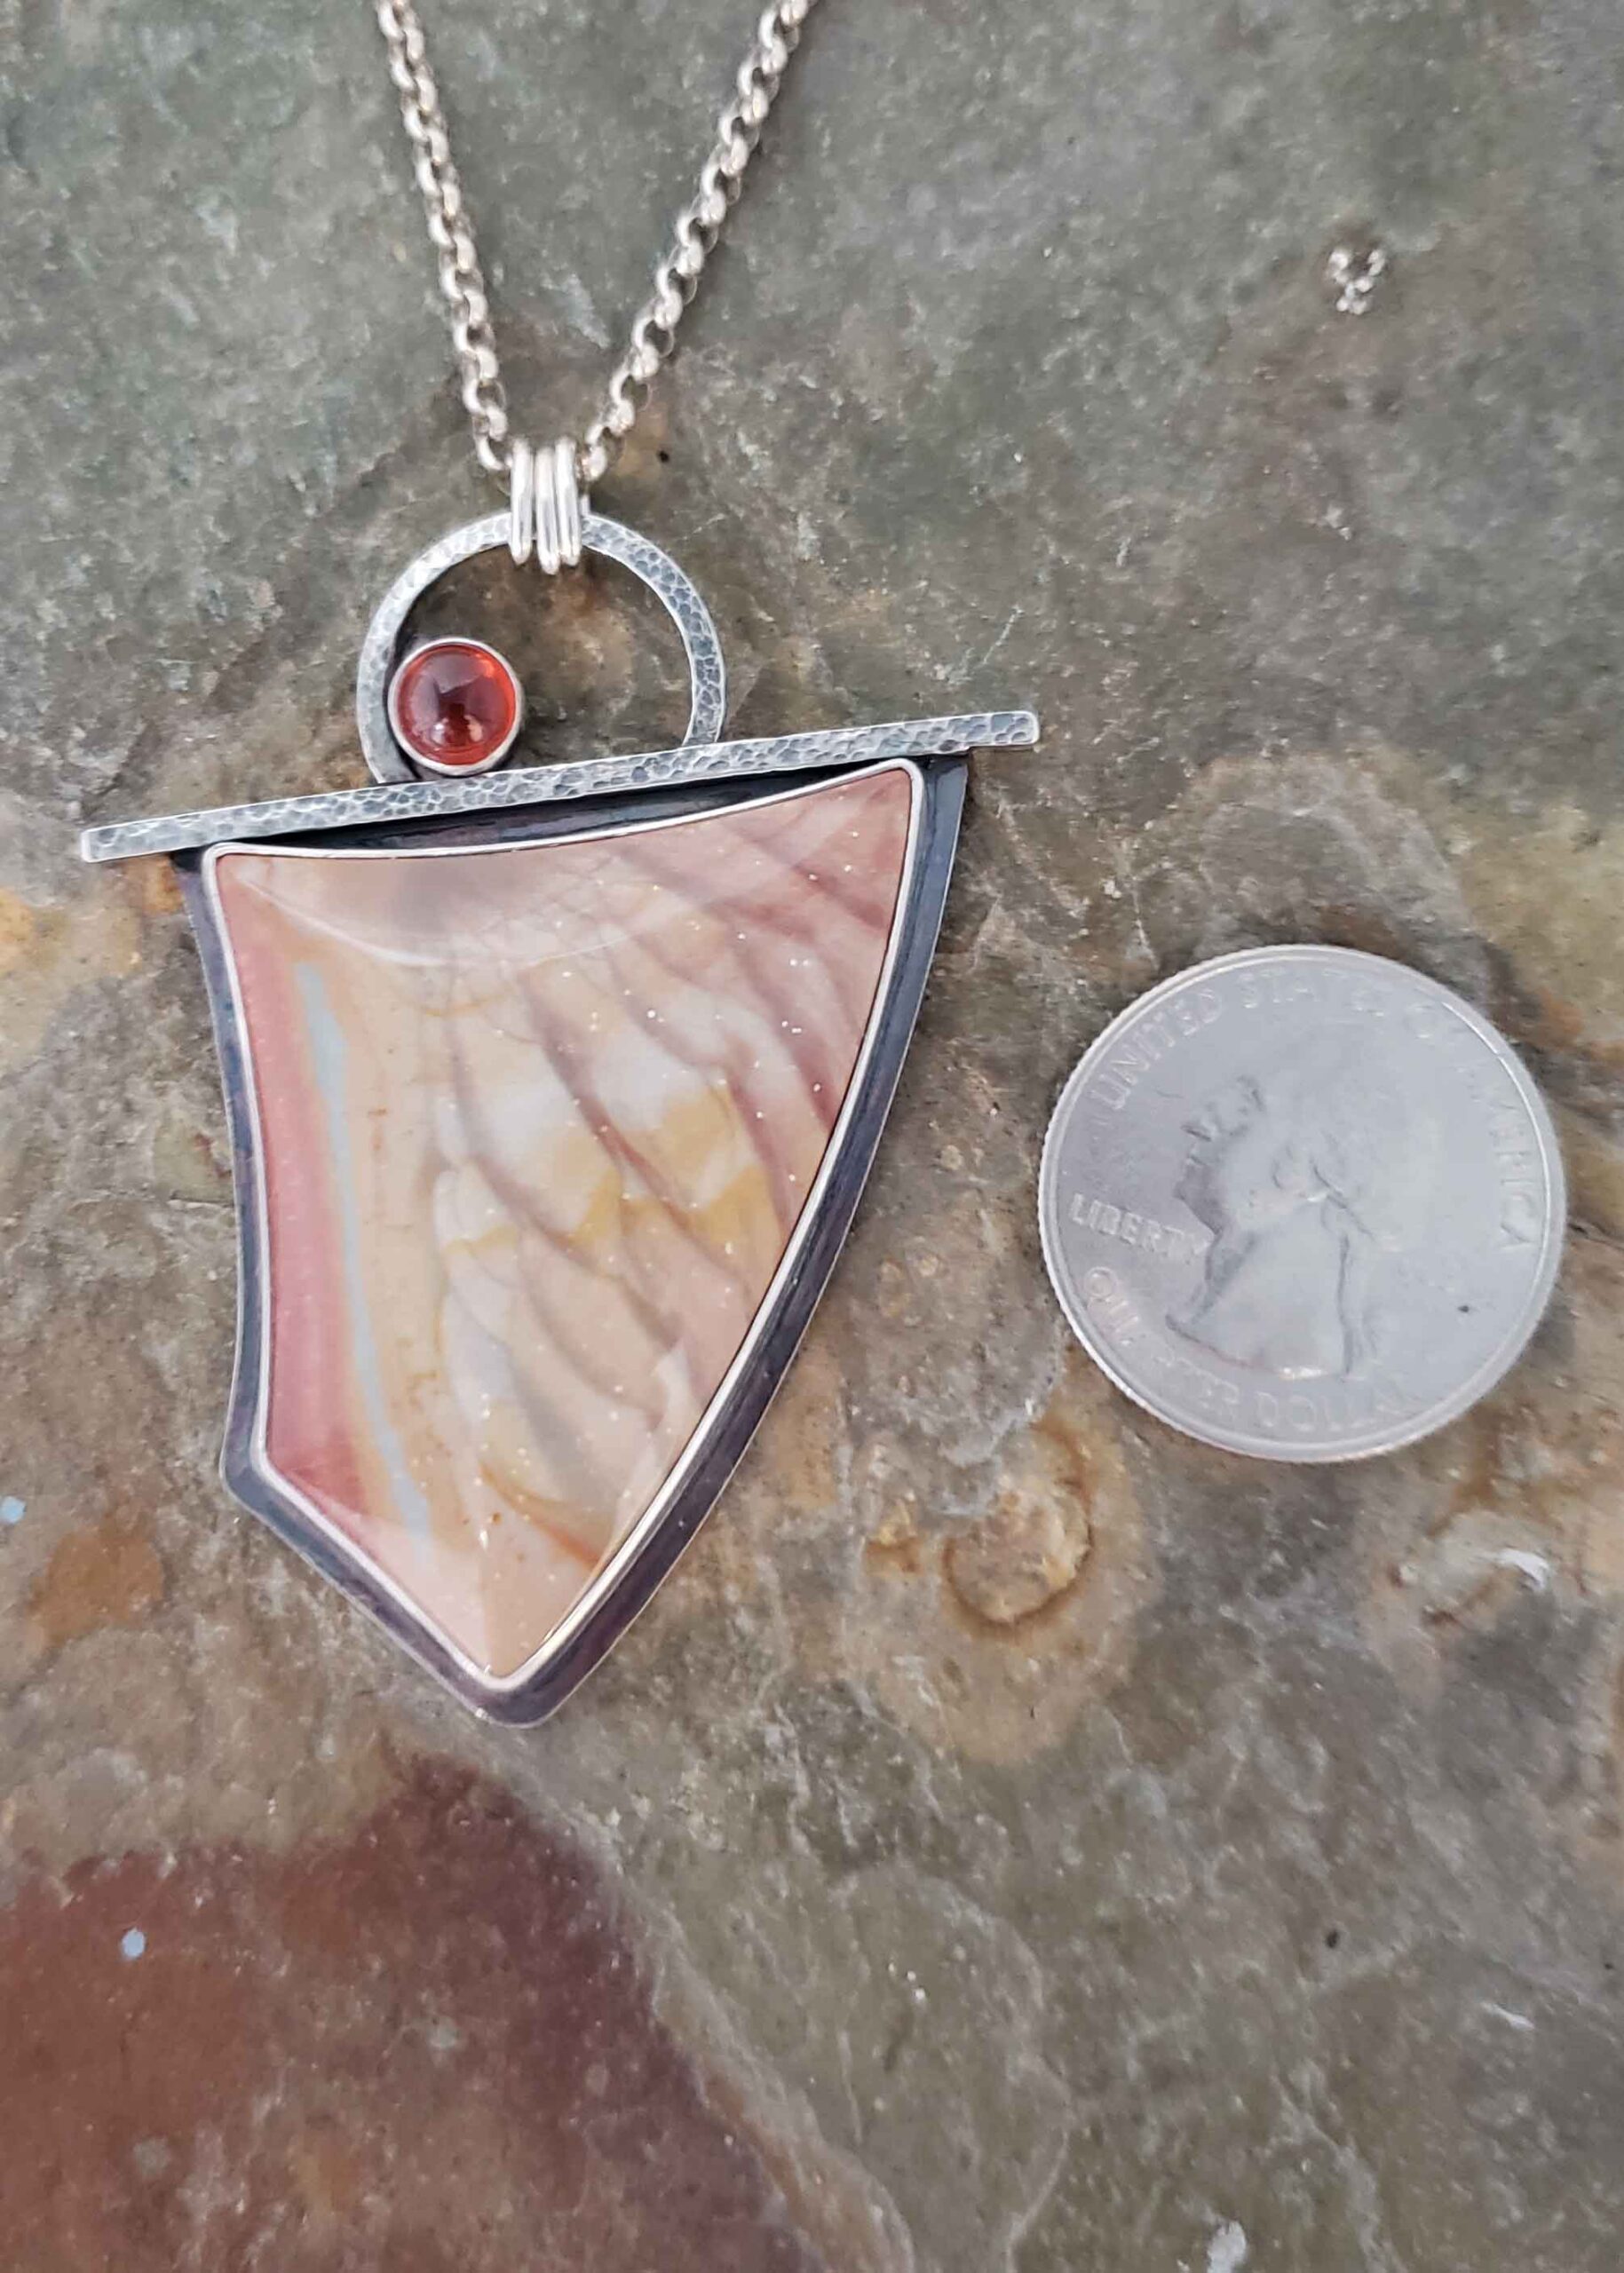 soft peach, creams and blues in this stone set in a silver pendant